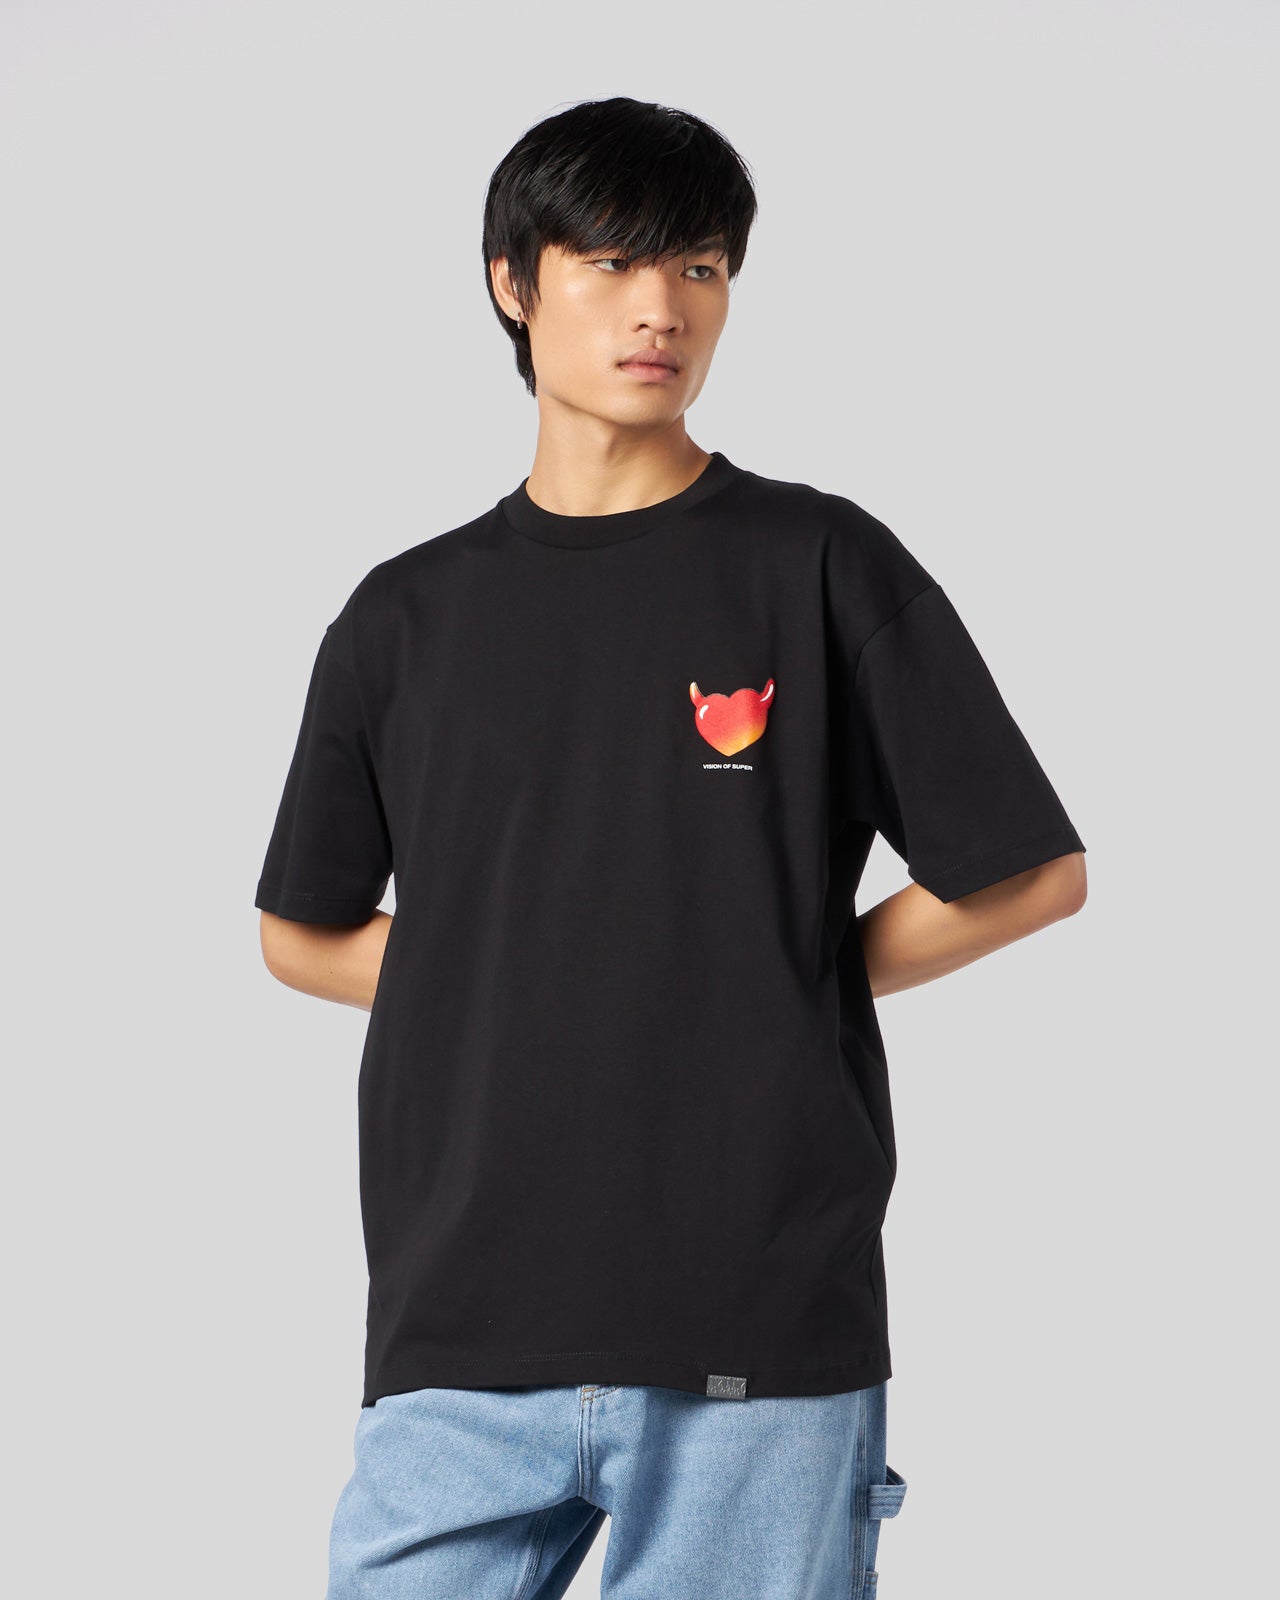 BLACK T-SHIRT WITH PUFFY LOVE PRINT